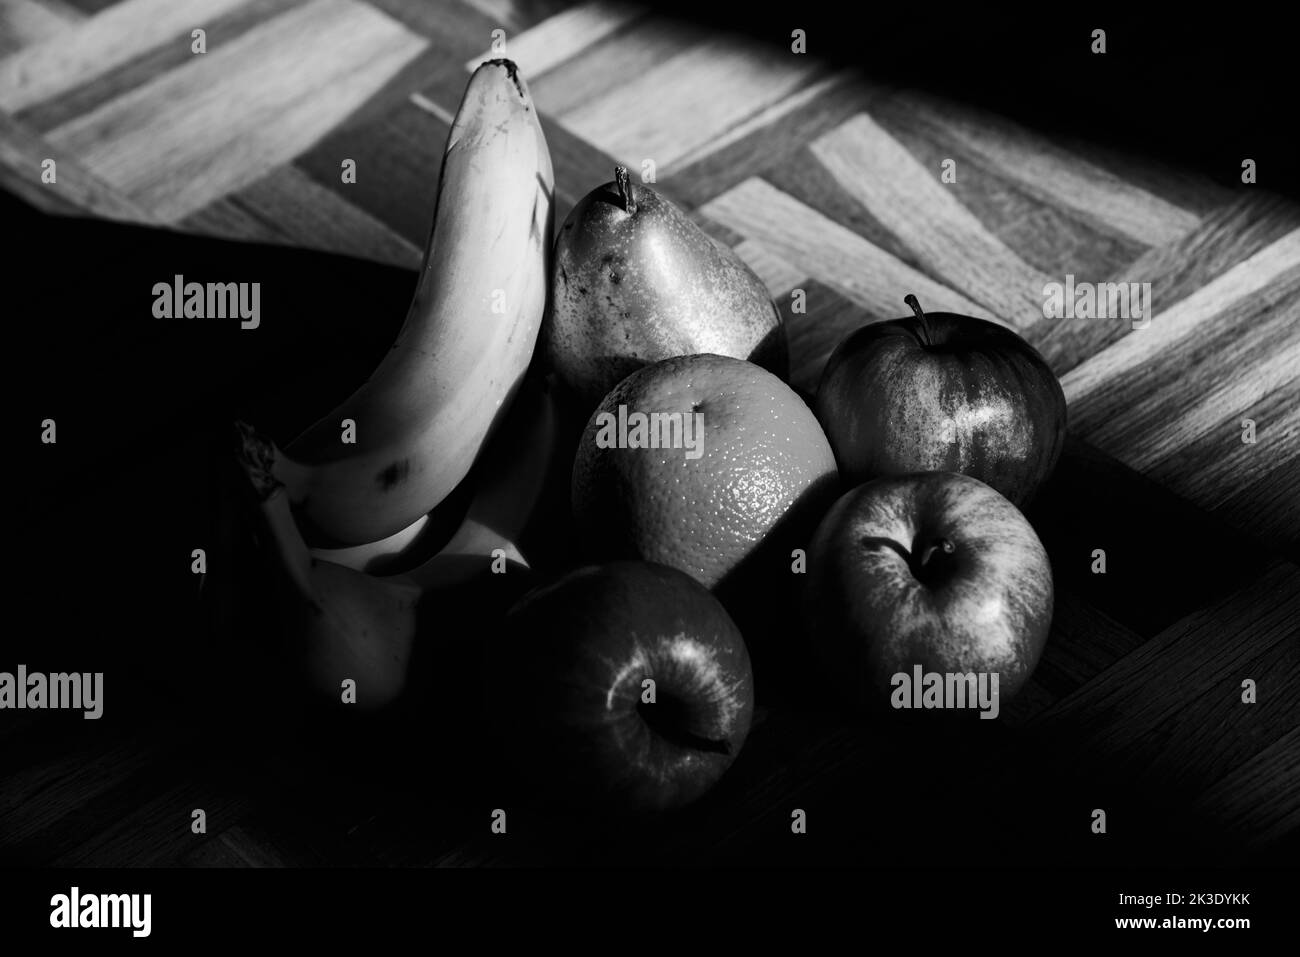 Still life with organic apples, pear, orange banana ripe fruits on vintage wooden surface. Healthy eating background. Black white photography Stock Photo